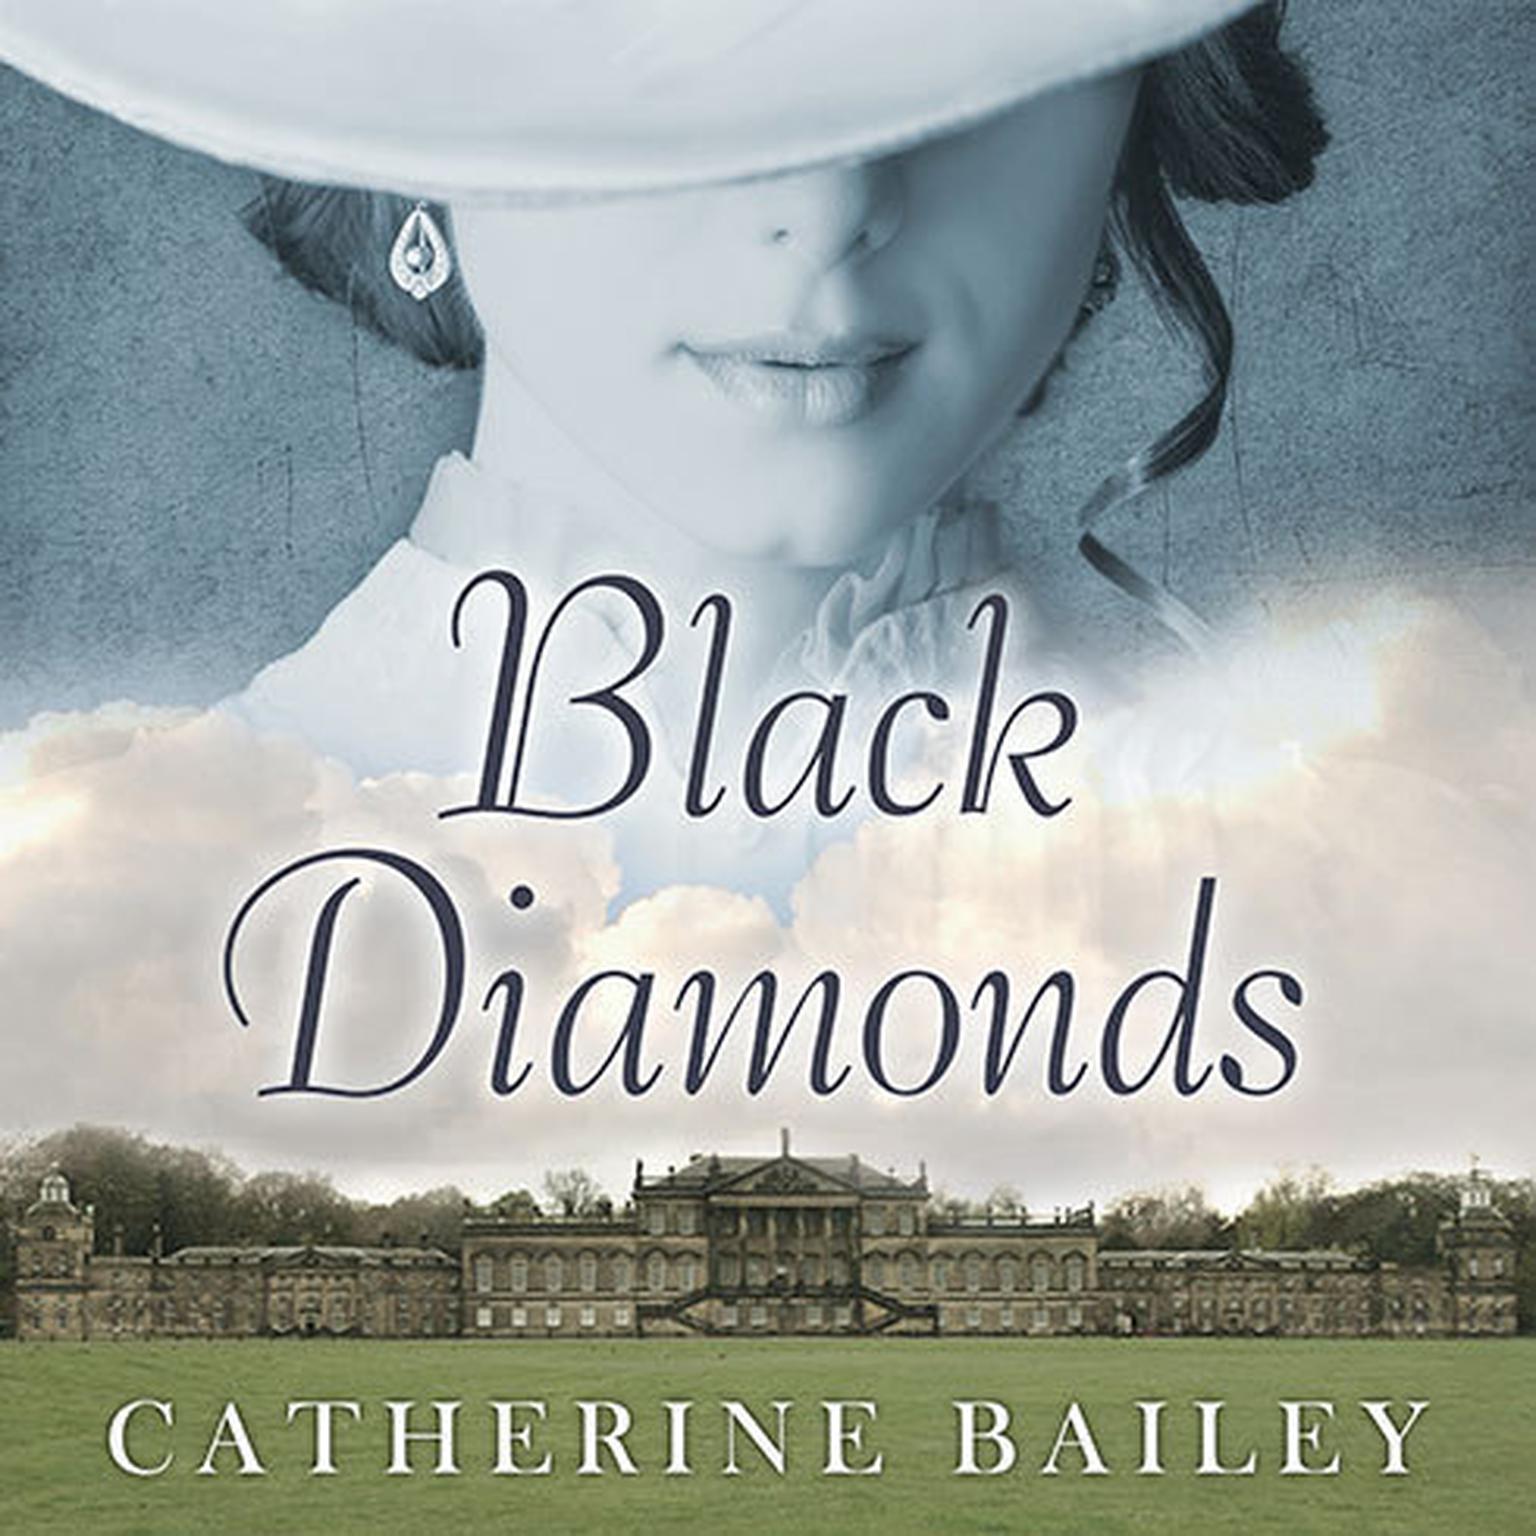 Black Diamonds: The Downfall of an Aristocratic Dynasty and the Fifty Years That Changed England Audiobook, by Catherine Bailey